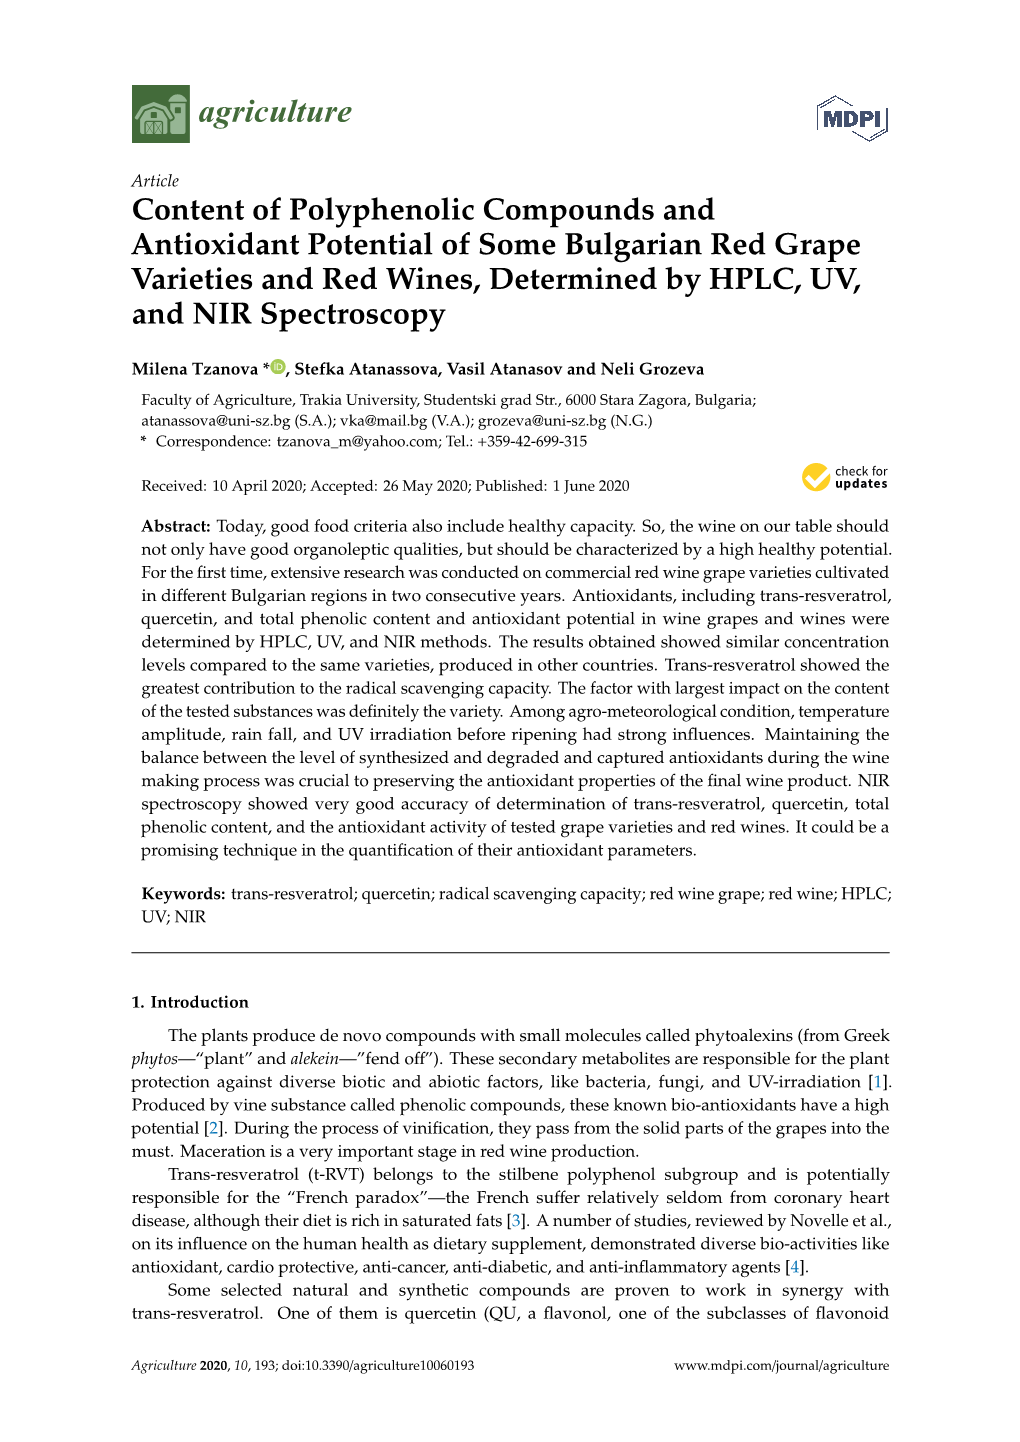 Content of Polyphenolic Compounds and Antioxidant Potential of Some Bulgarian Red Grape Varieties and Red Wines, Determined by HPLC, UV, and NIR Spectroscopy